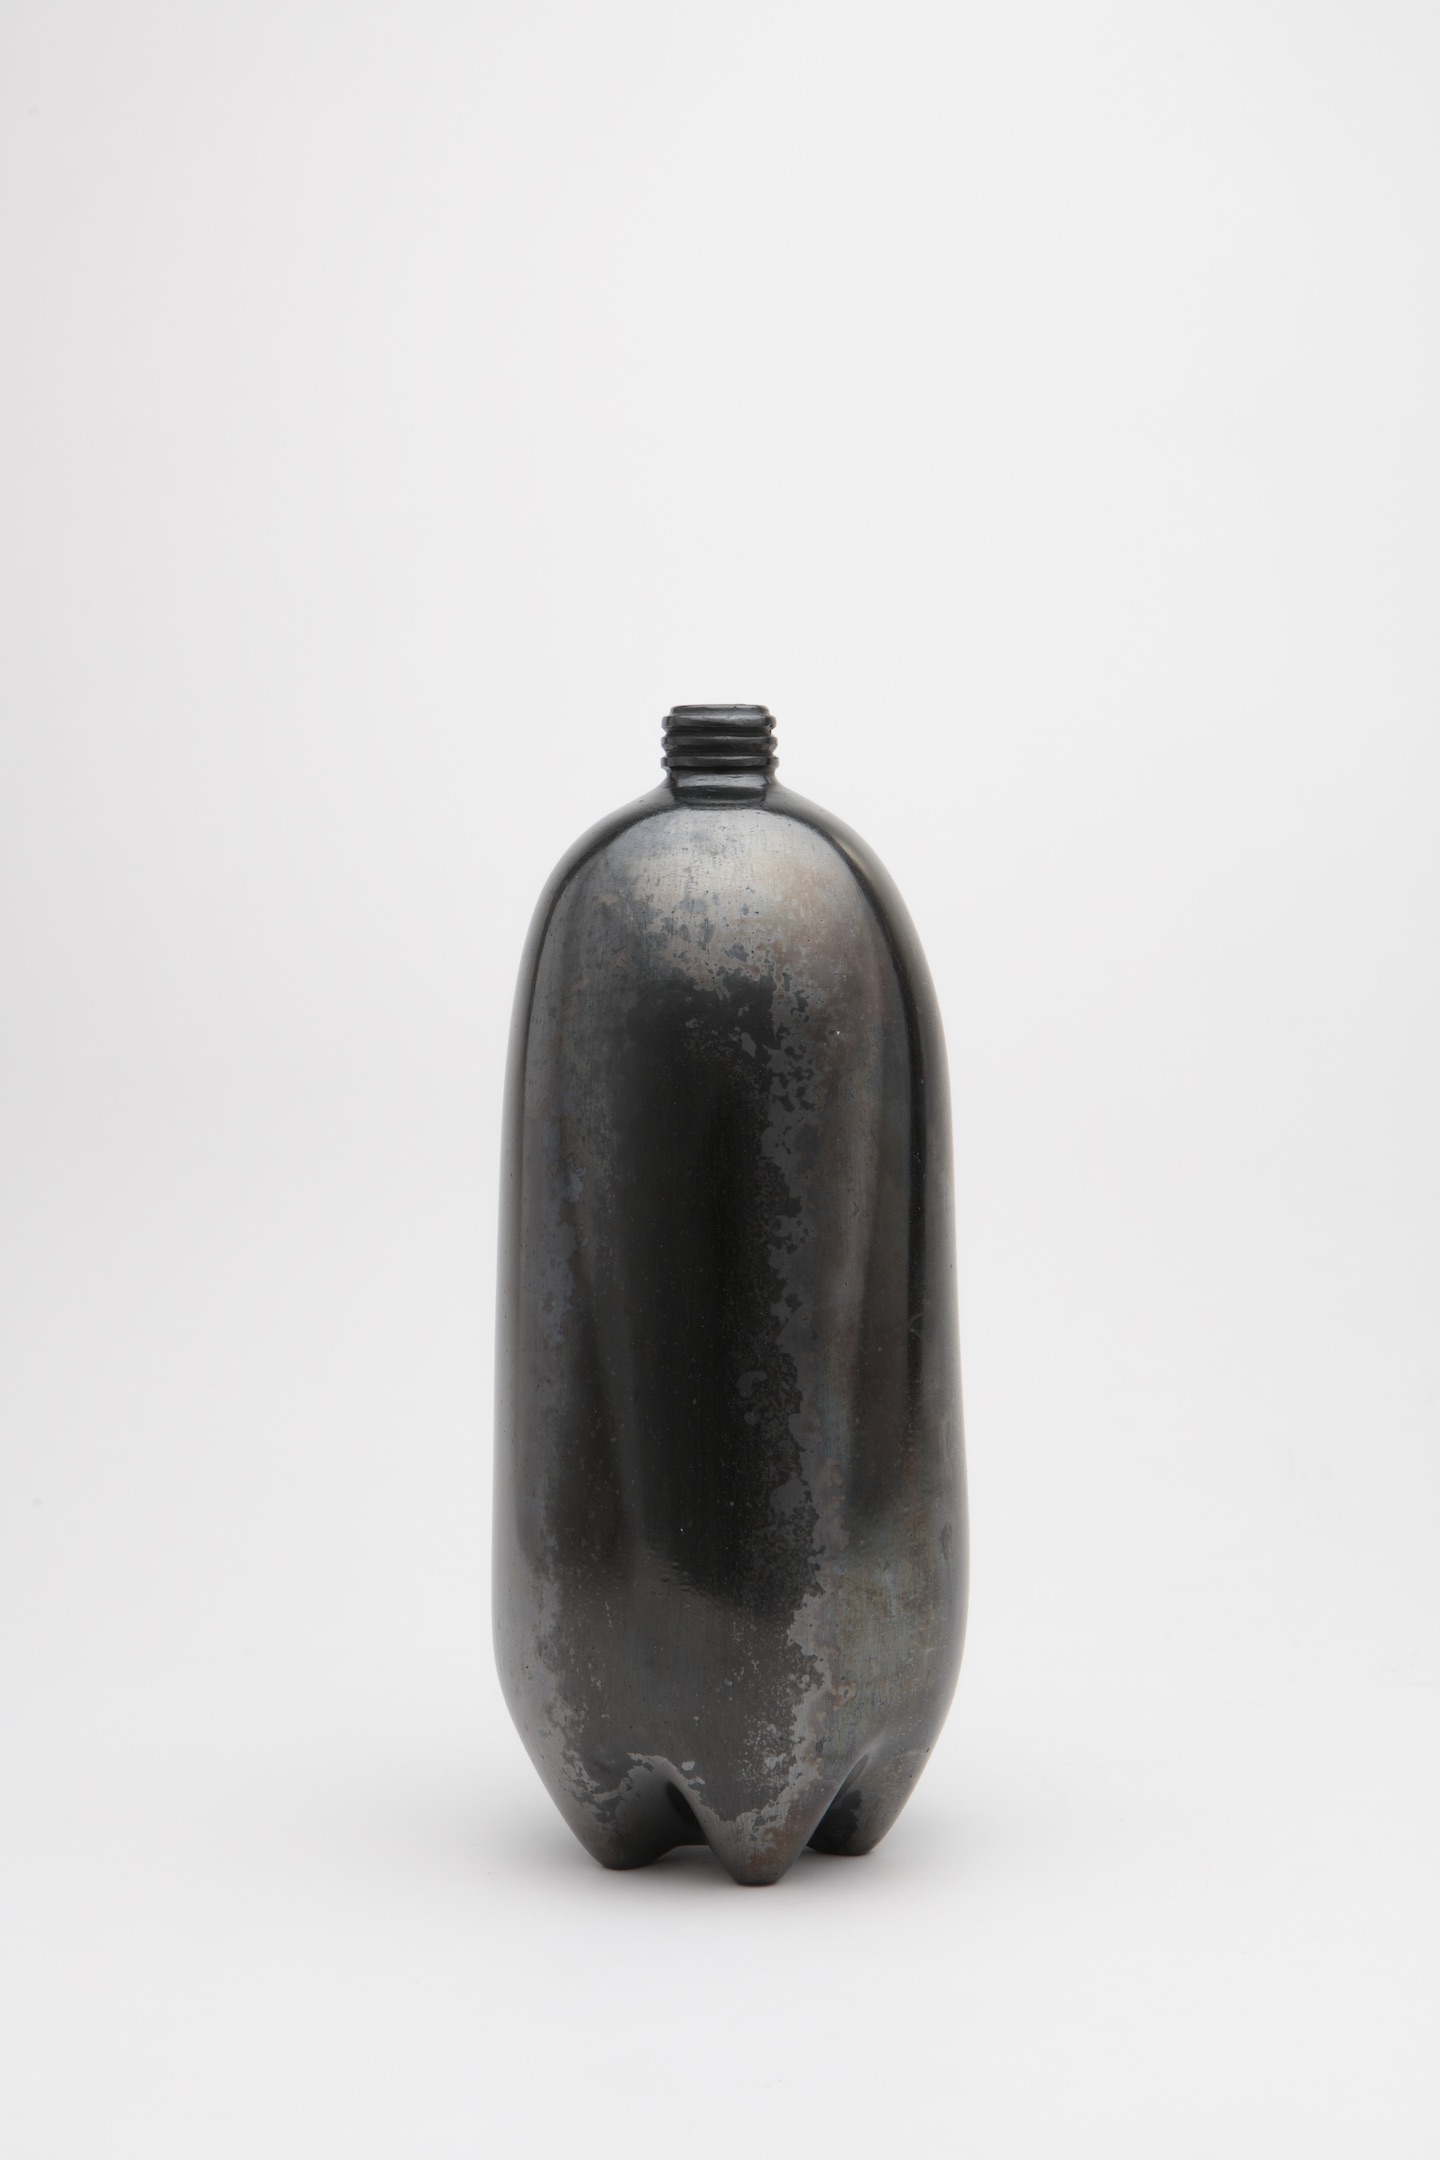 Shiny, black clay sculpture resembling a two-liter plastic bottle.